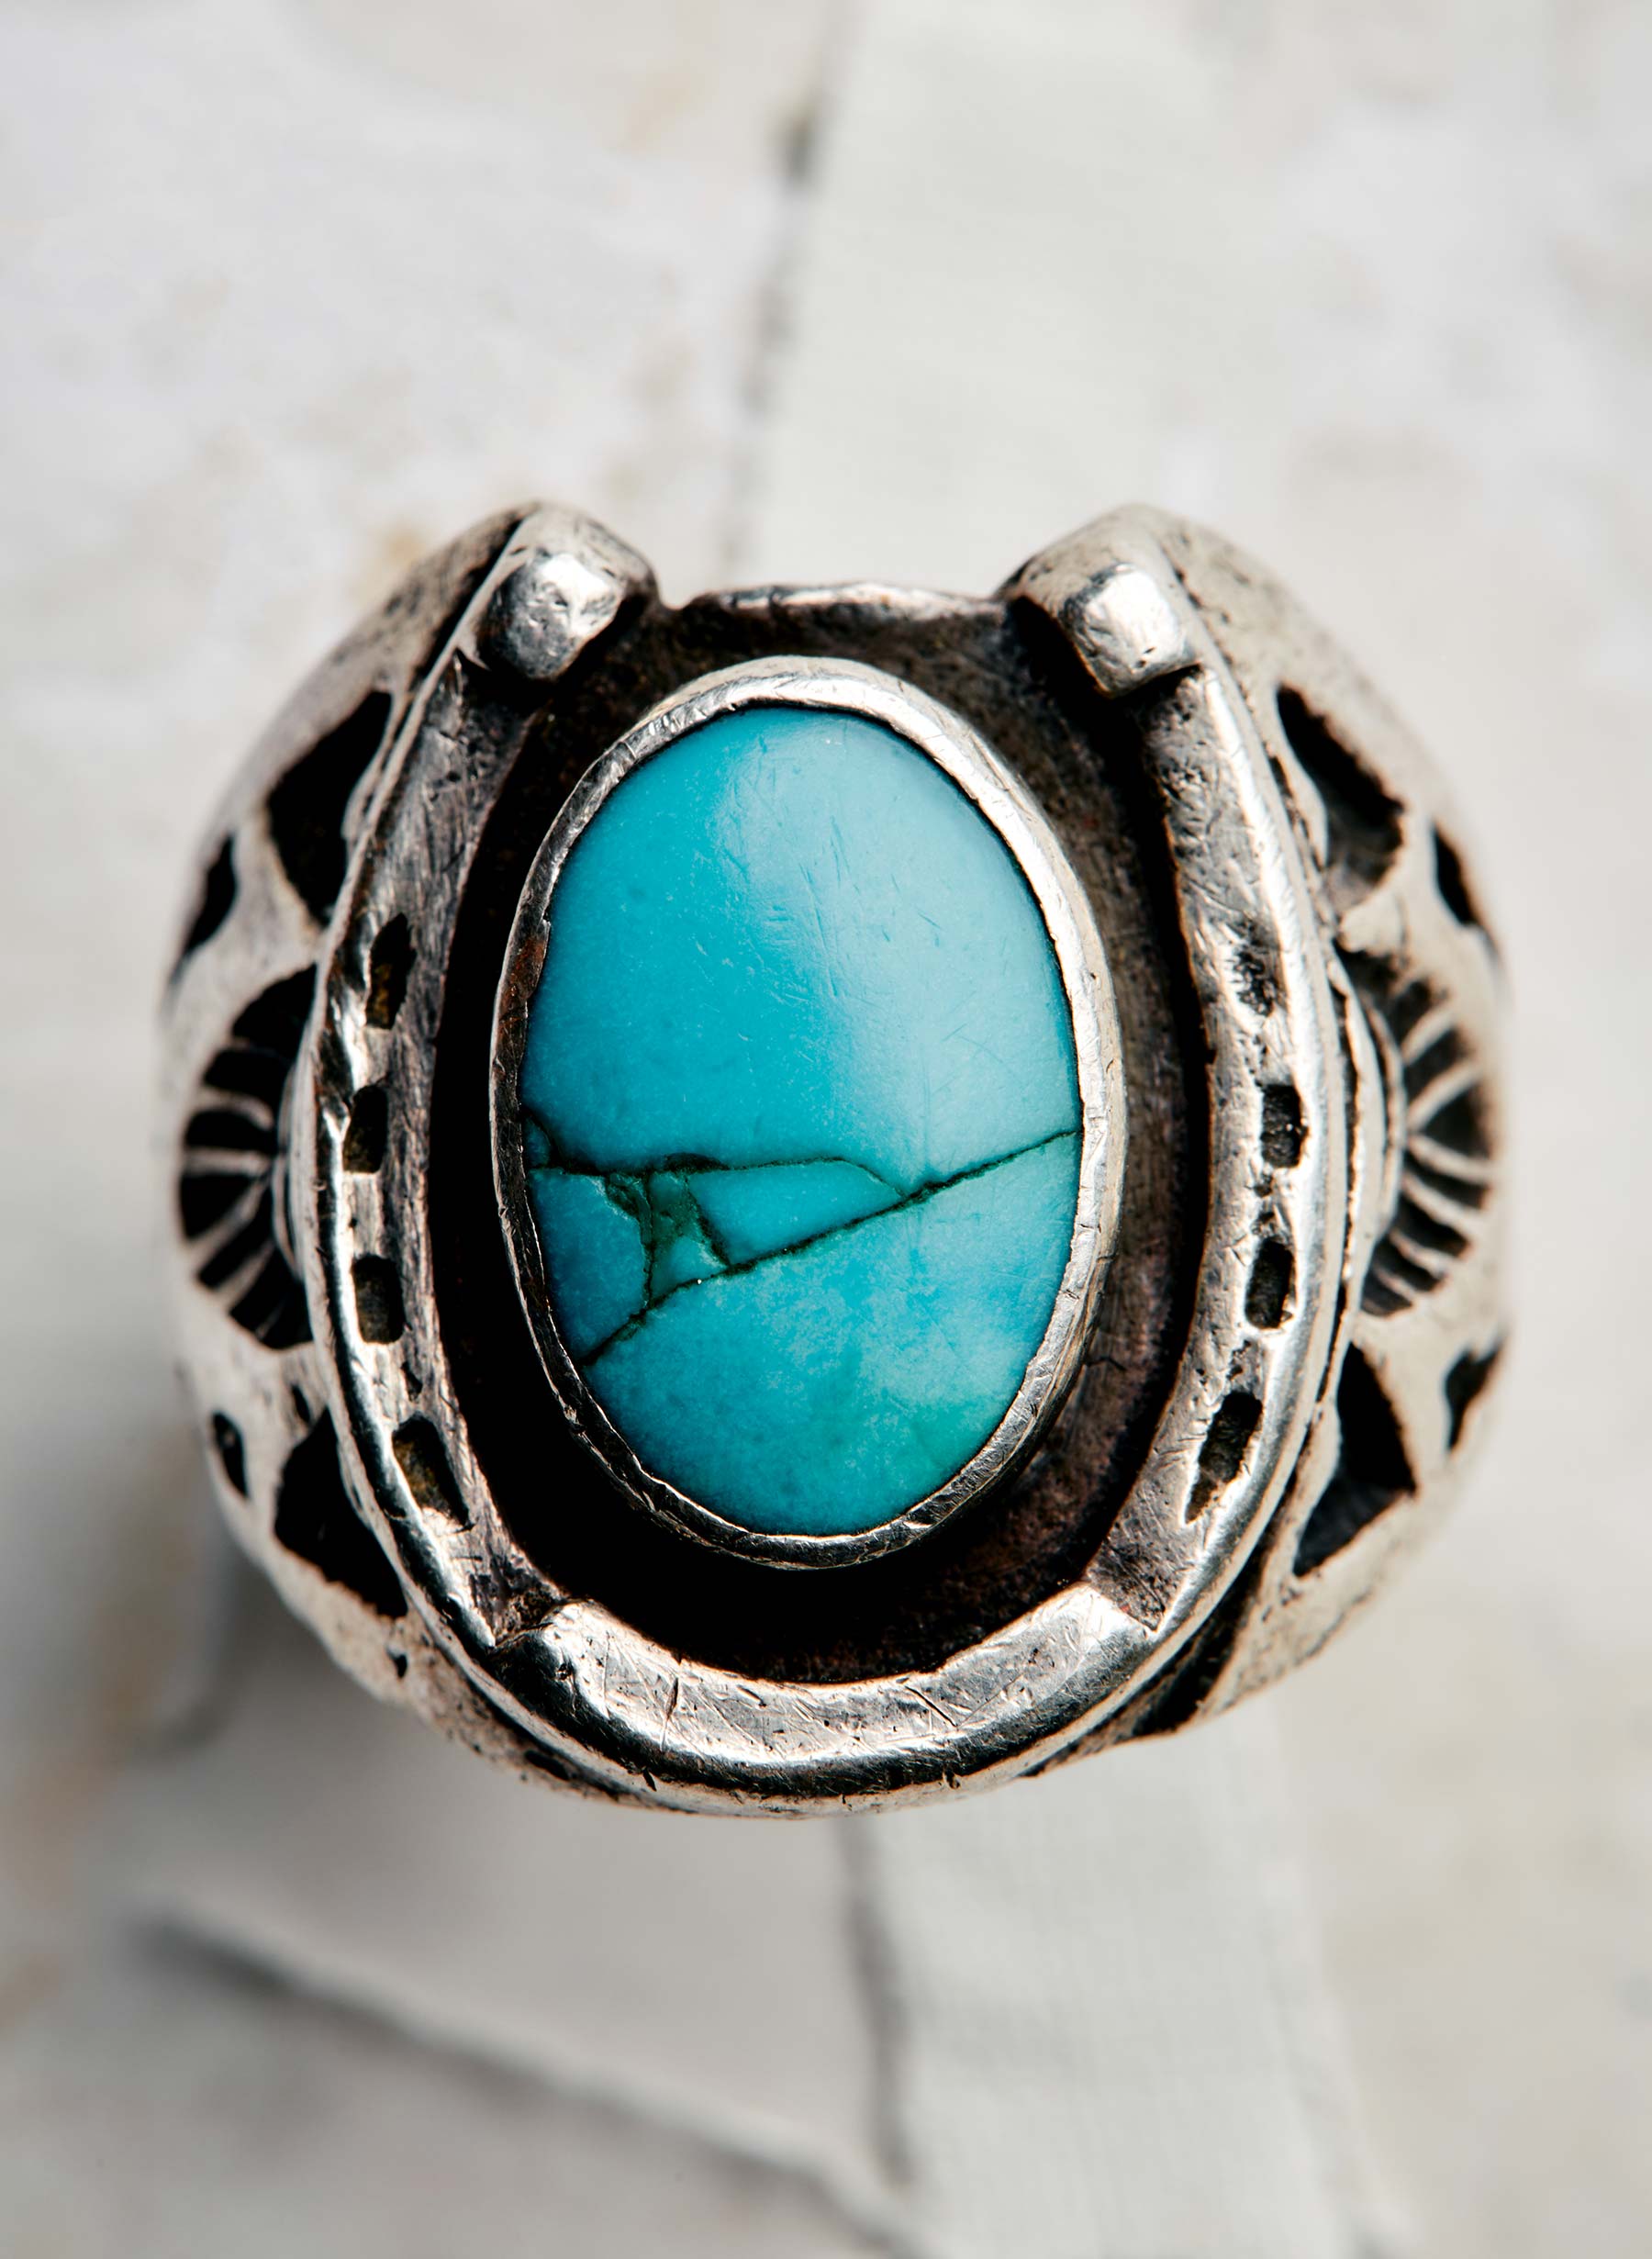 Body jewelry, Azure, Natural material, Silver, Jewellery, Electric blue, Circle, Ring, Gemstone, Metal